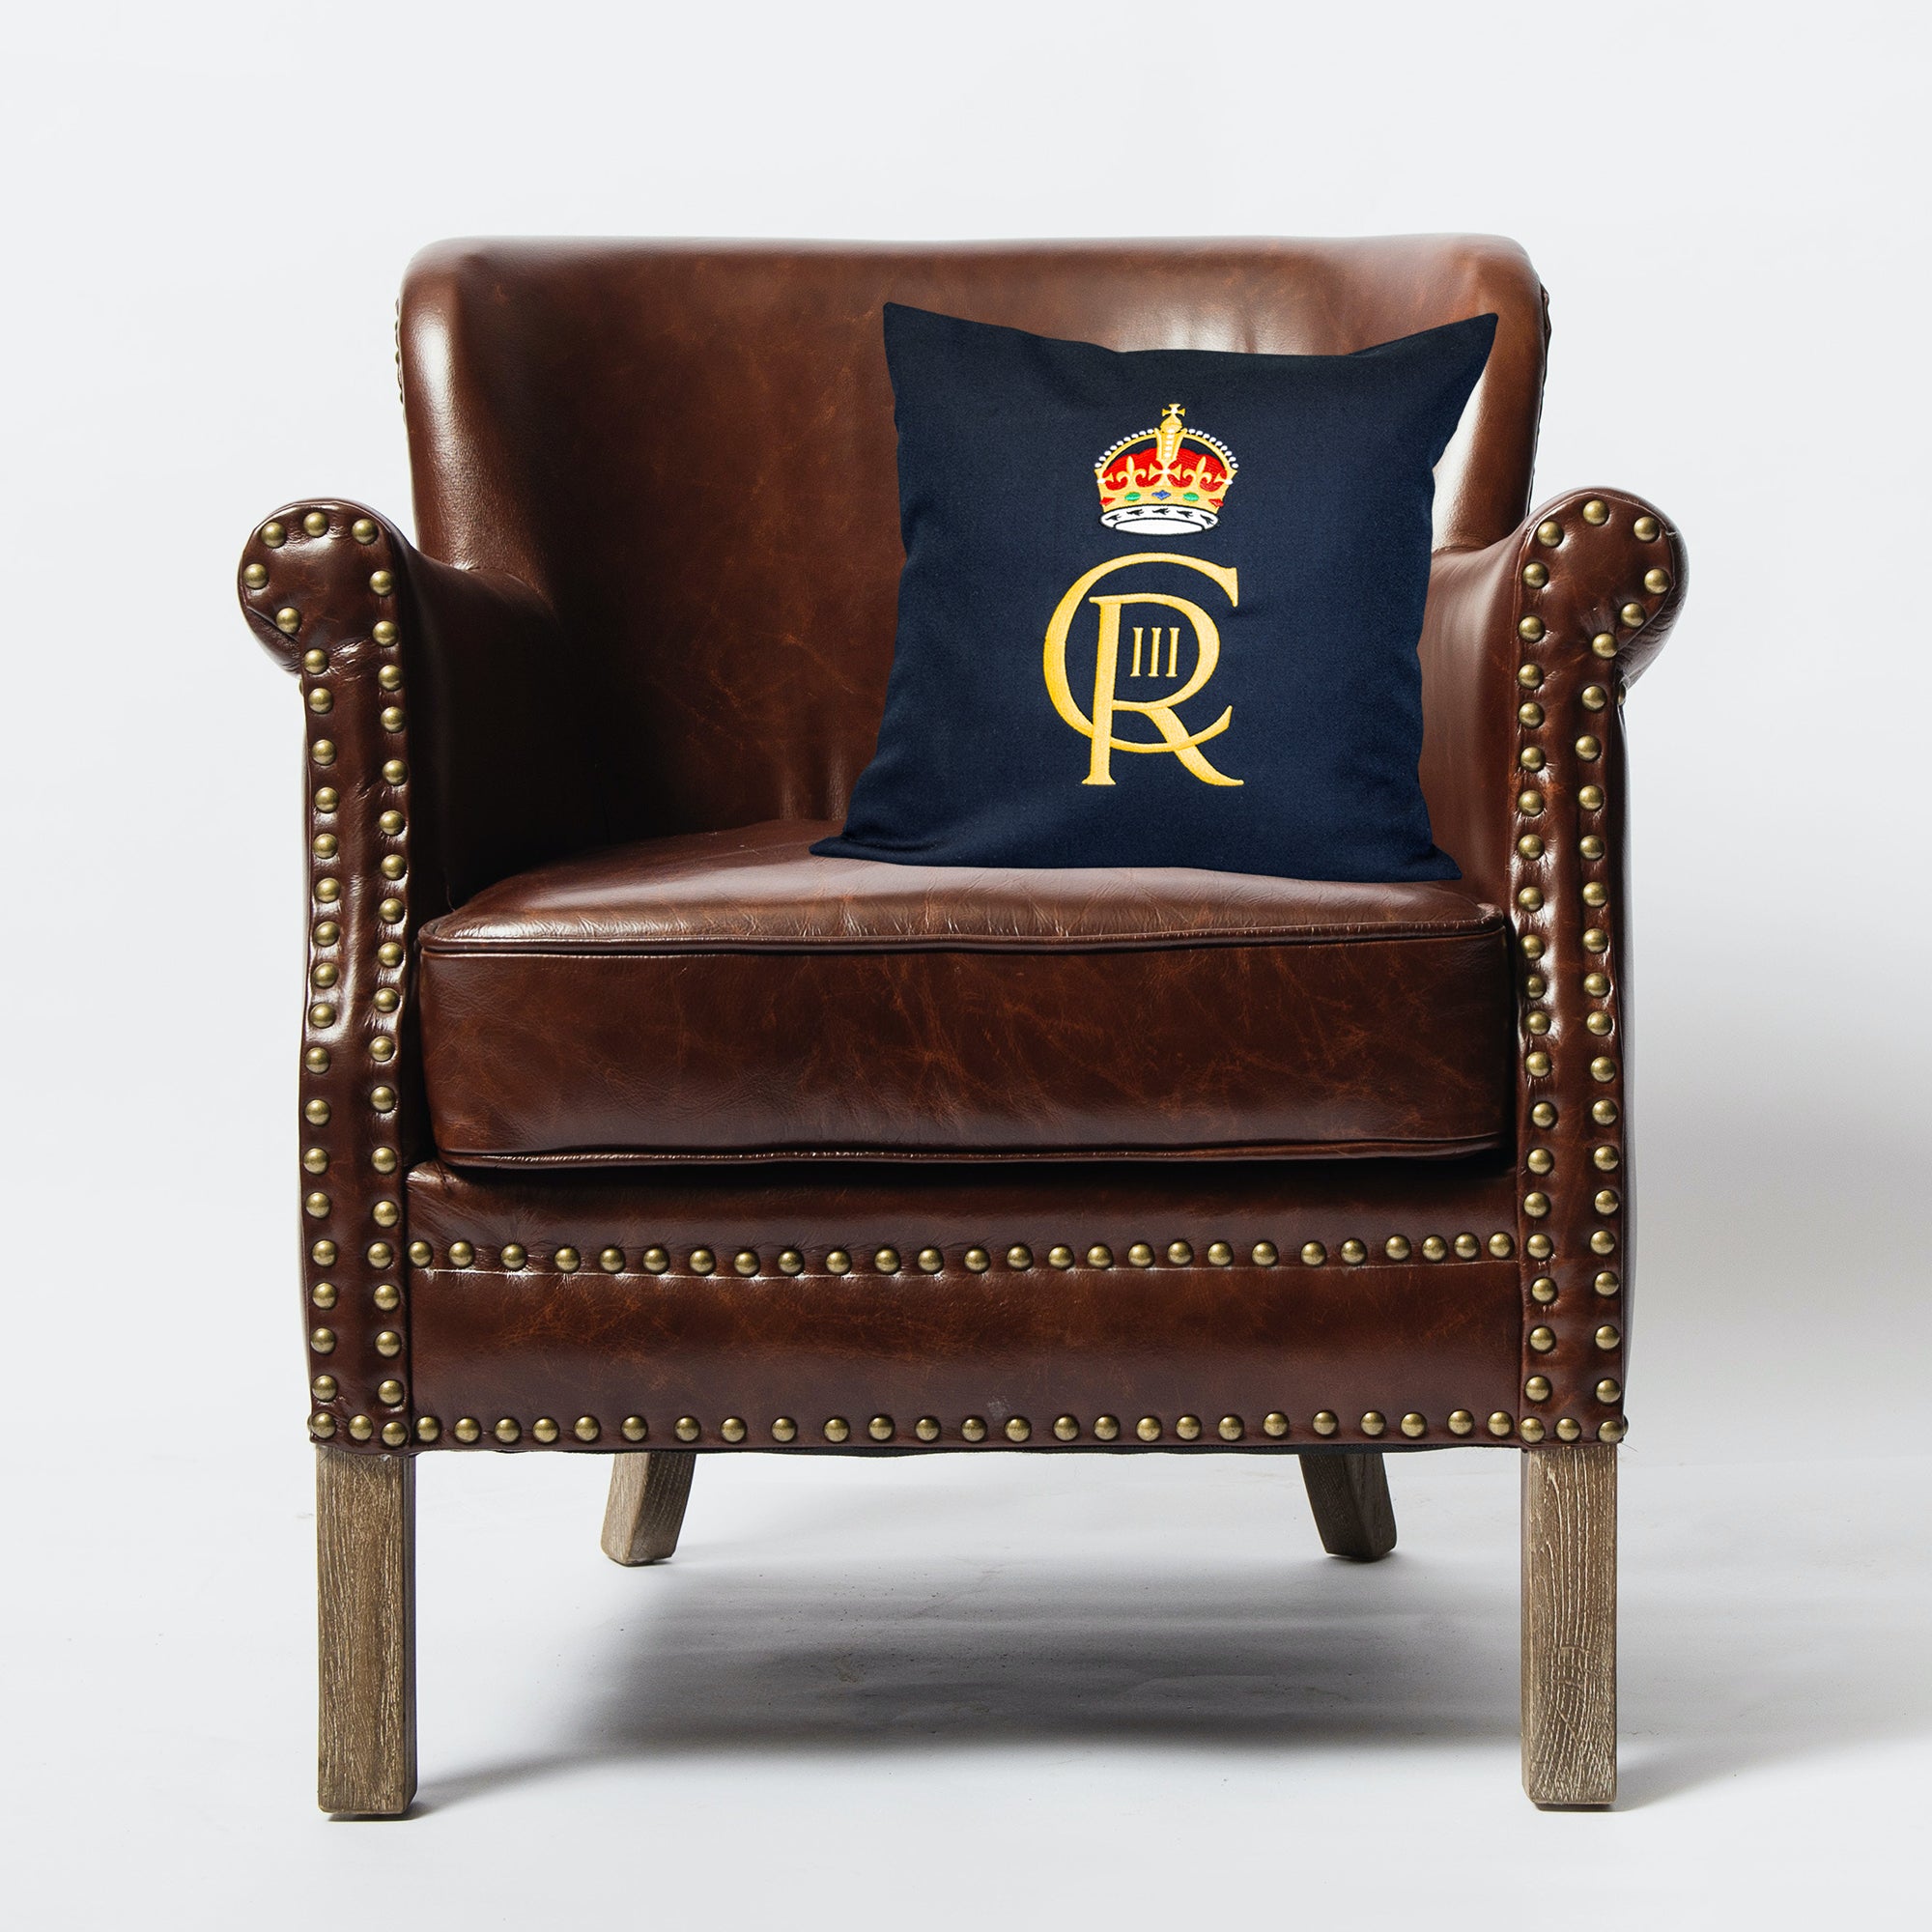 CIIIR Cypher (King's Crown) Machine Embroidered Cushion Cover